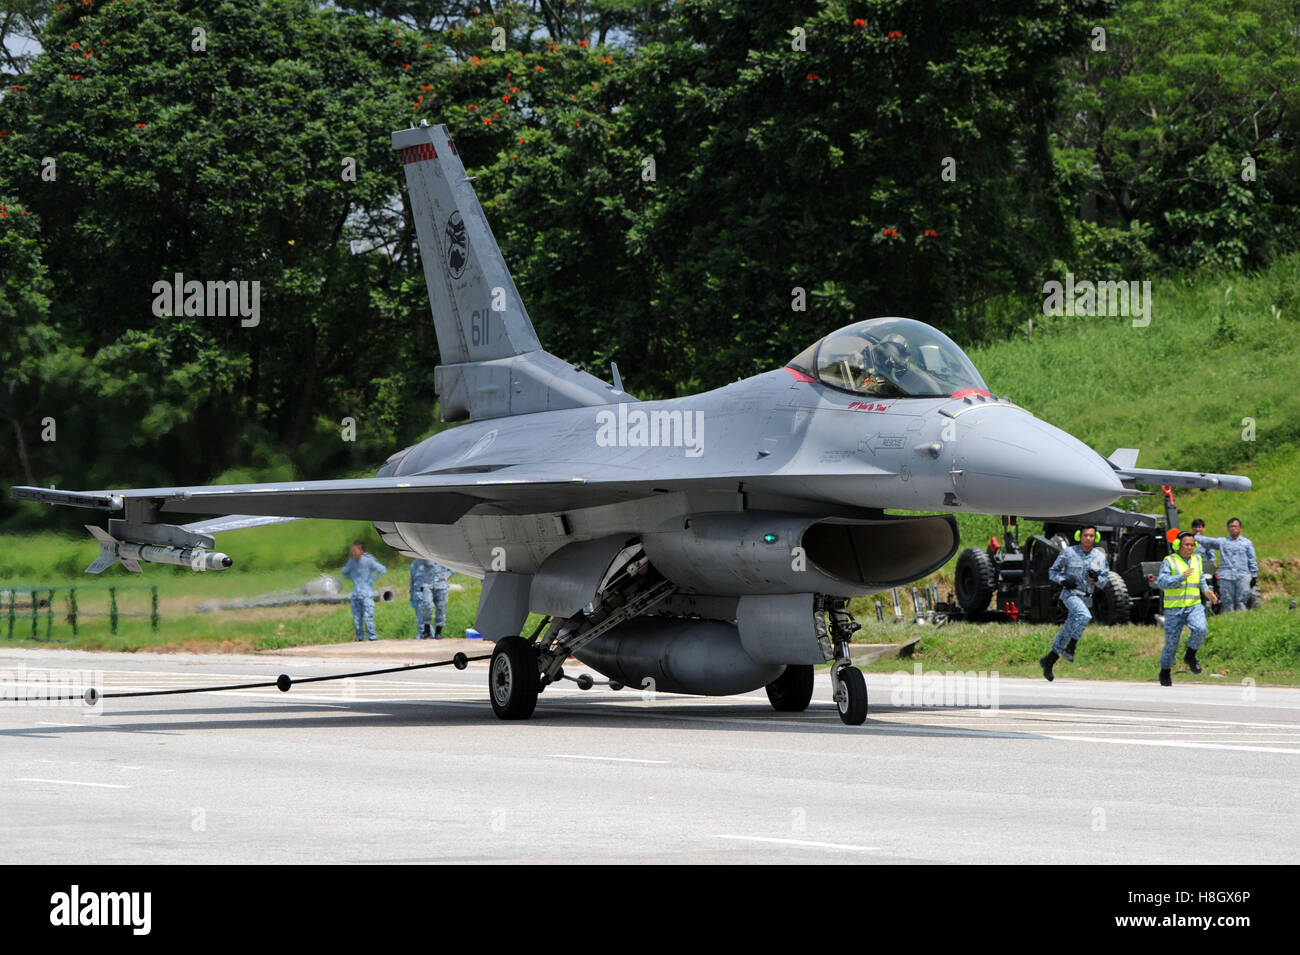 Singapore. 12th Nov, 2016. An F-16 fighter plane of the Republic of Singapore Air Force (RSAF) lands during a rehearsal of exercise Torrent on Singapore's Lim Chu Kang road, Nov. 12, 2016. The Republic of Singapore Air Force (RSAF) Sunday conducted exercise Torrent, in which a public road was converted into a runway for aircraft take-off and landing. The alternate runway exercise, which was last conducted in 2008 and now is in its seventh edition, aims to increase RSAF's aircraft take-off and landing capability. © Then Chih Wey/Xinhua/Alamy Live News Stock Photo